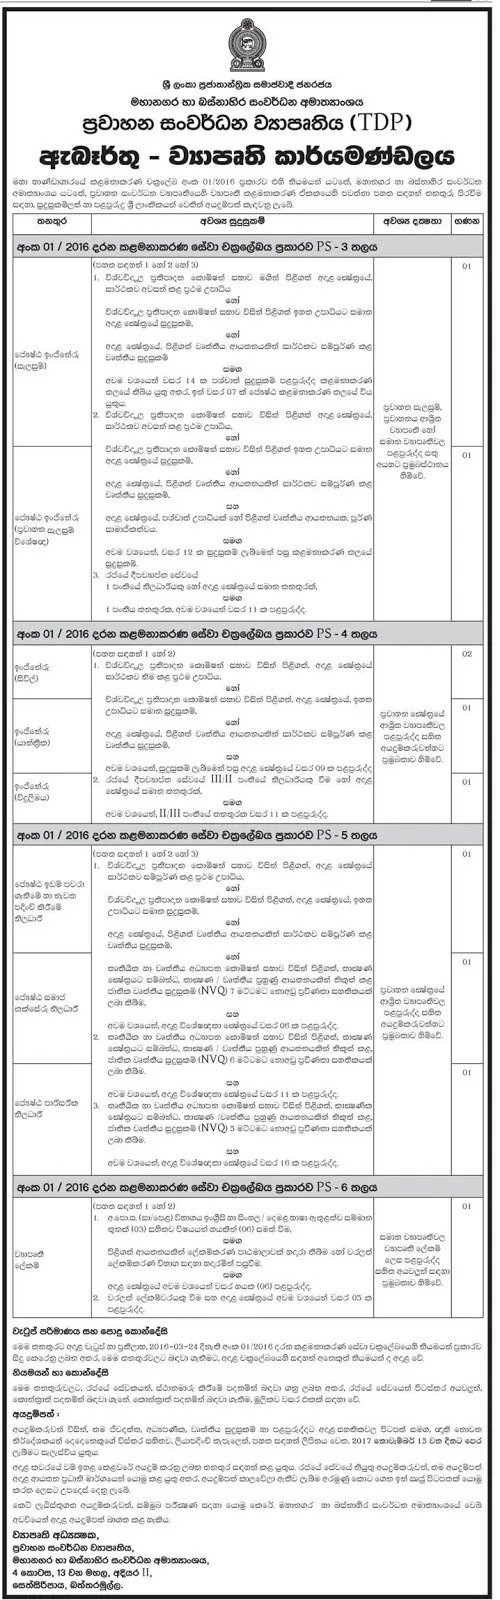 Ministry of Megapolis and Western Development Engineer and other Vacancies